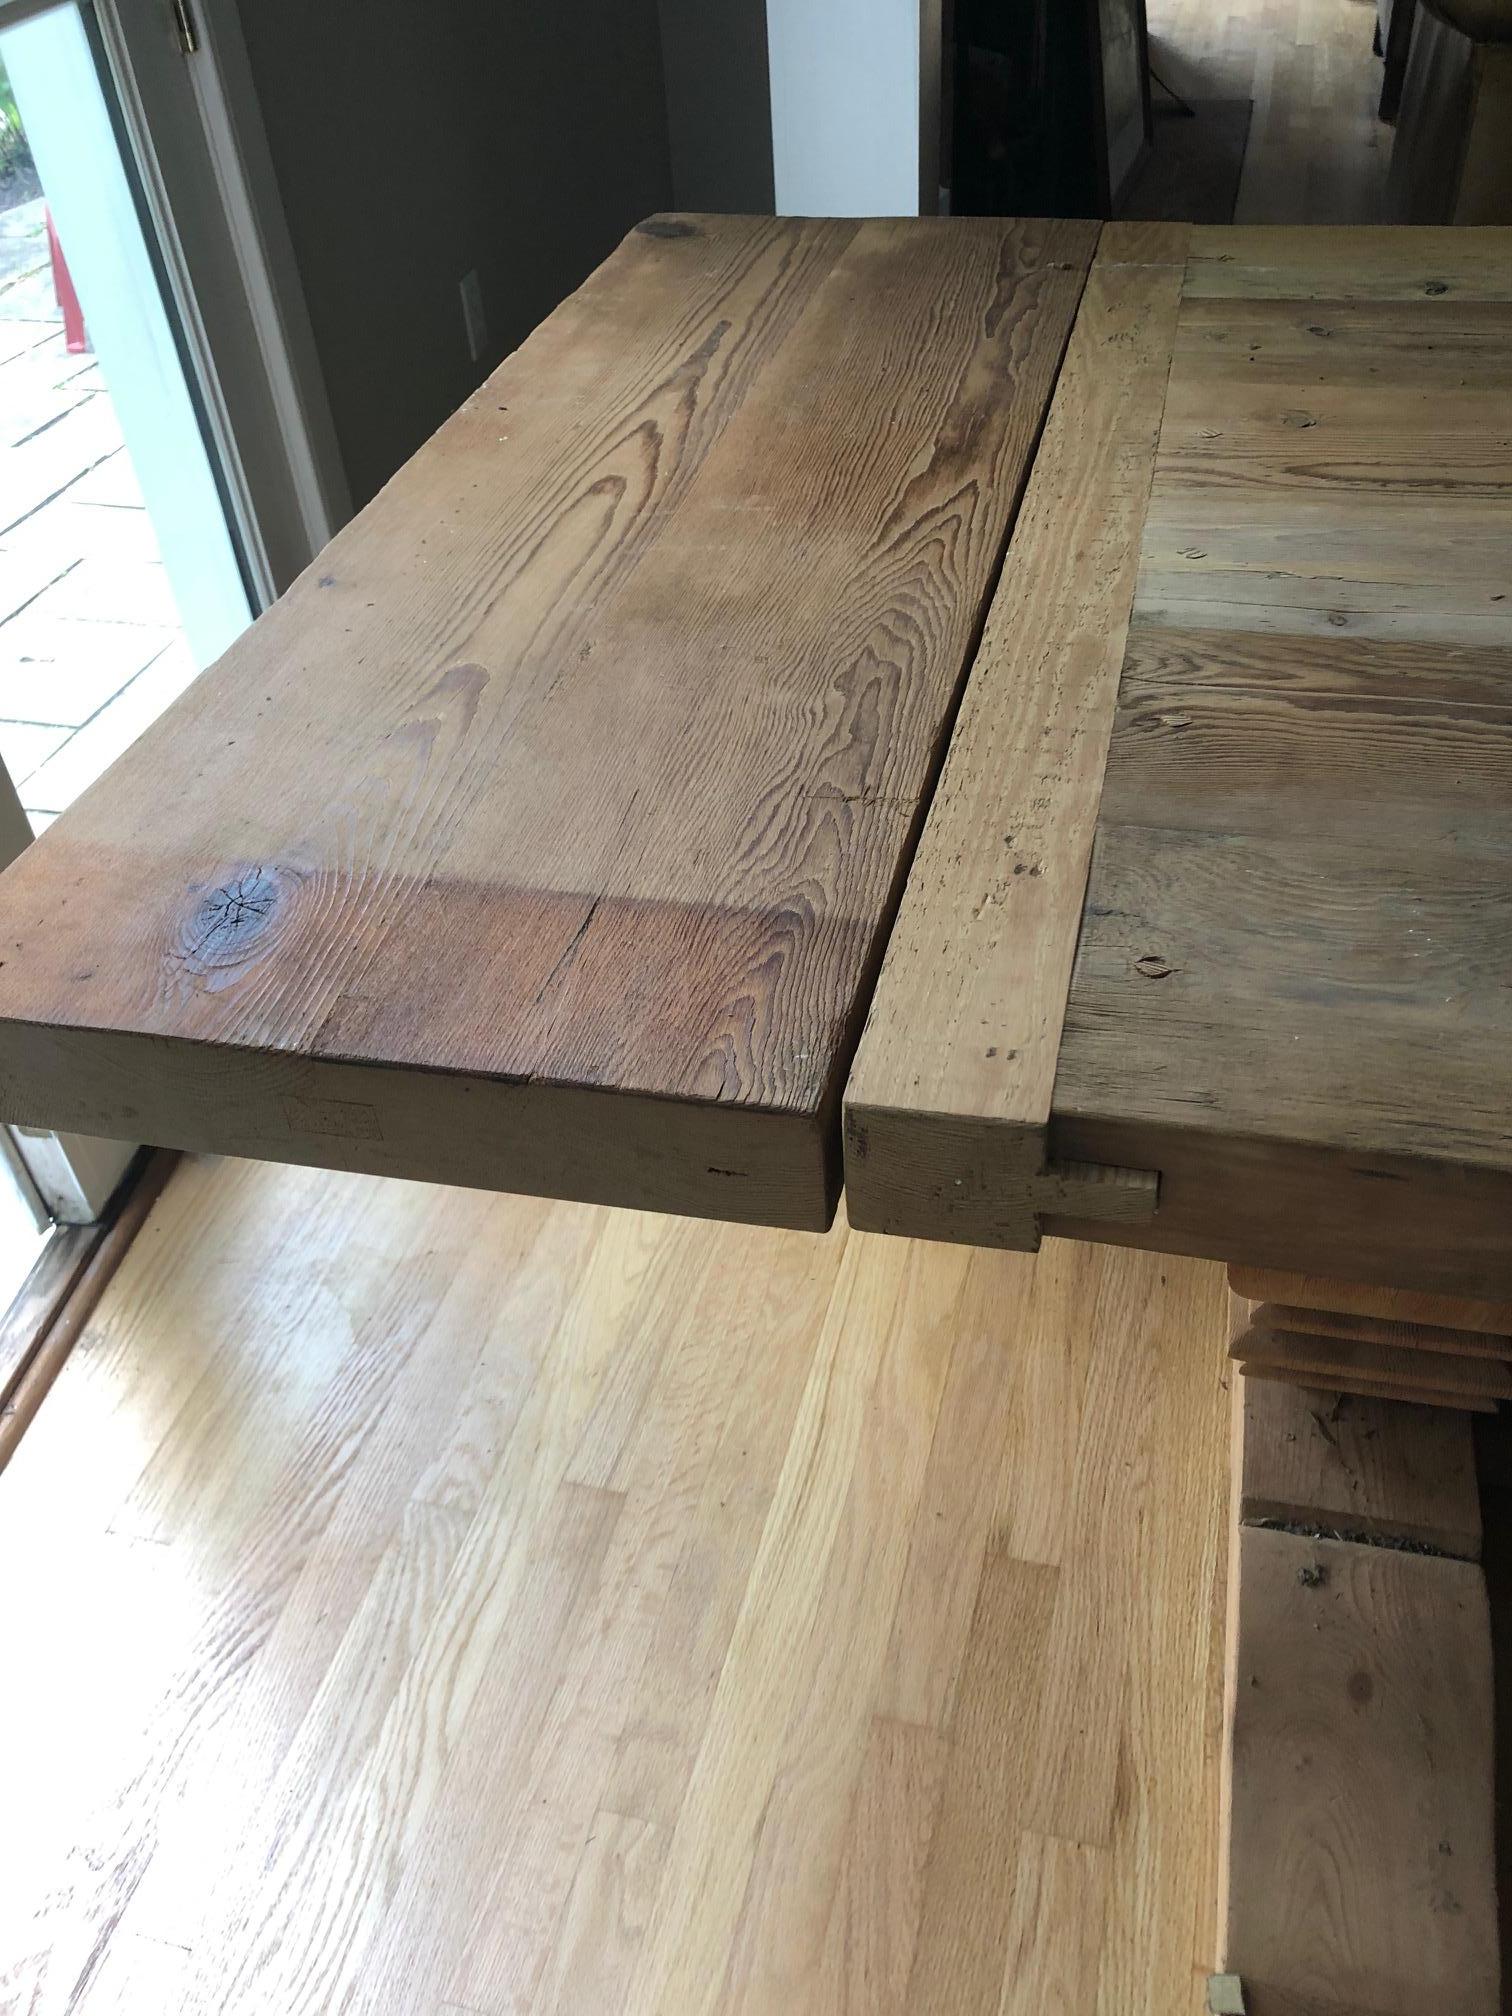 Fir Super Large Wonderfully Rustic Handcrafted Trestle Farm Table Dining Table